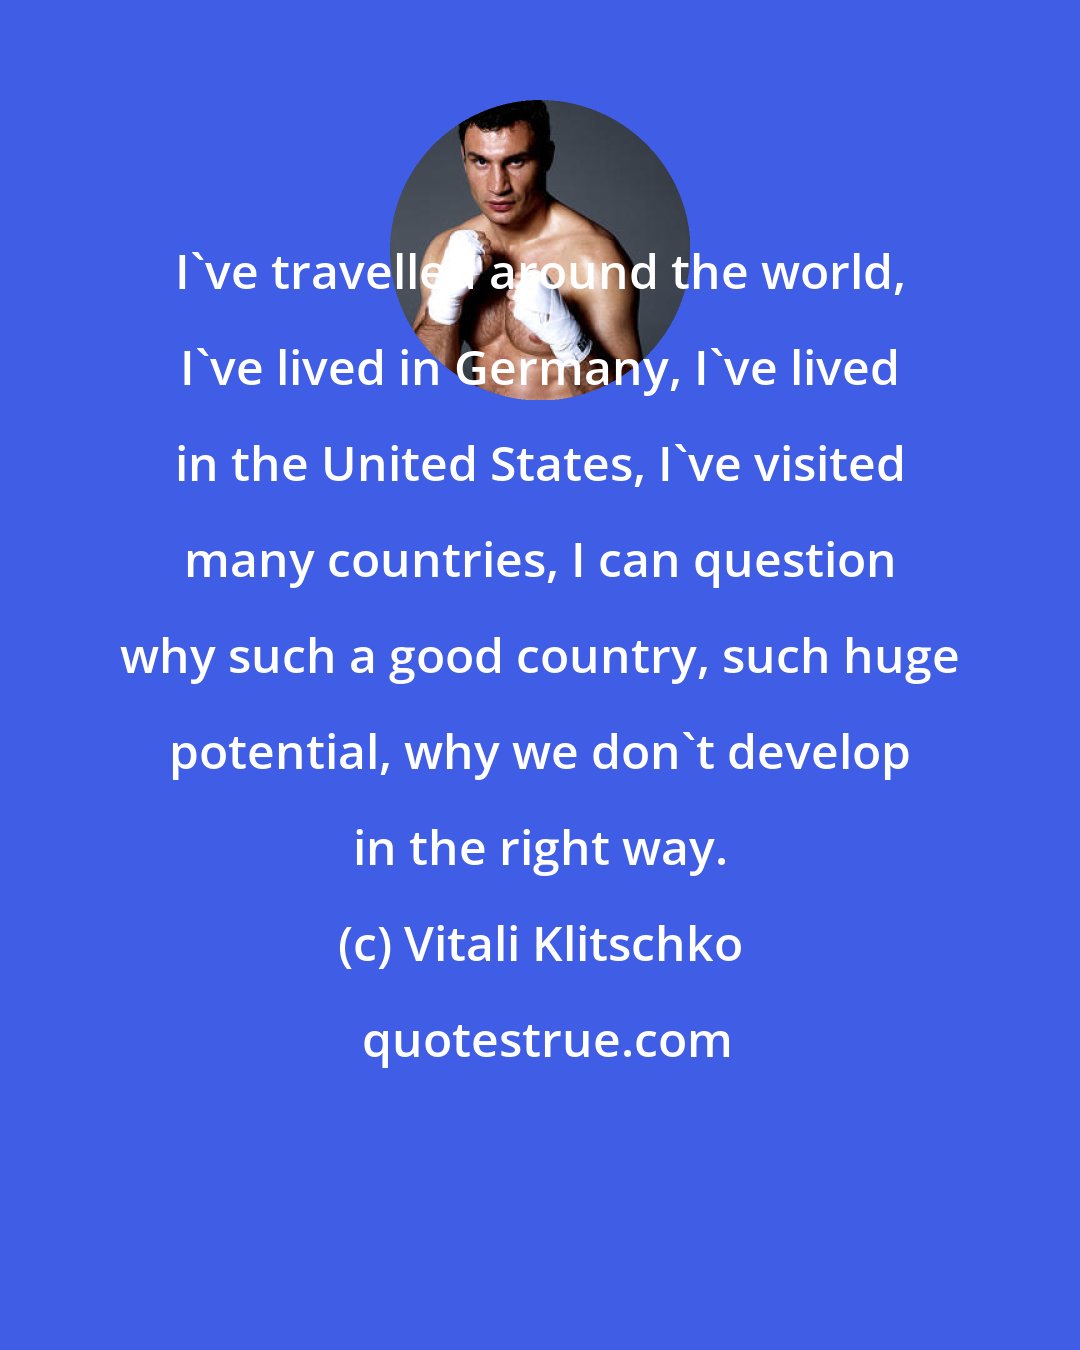 Vitali Klitschko: I've travelled around the world, I've lived in Germany, I've lived in the United States, I've visited many countries, I can question why such a good country, such huge potential, why we don't develop in the right way.